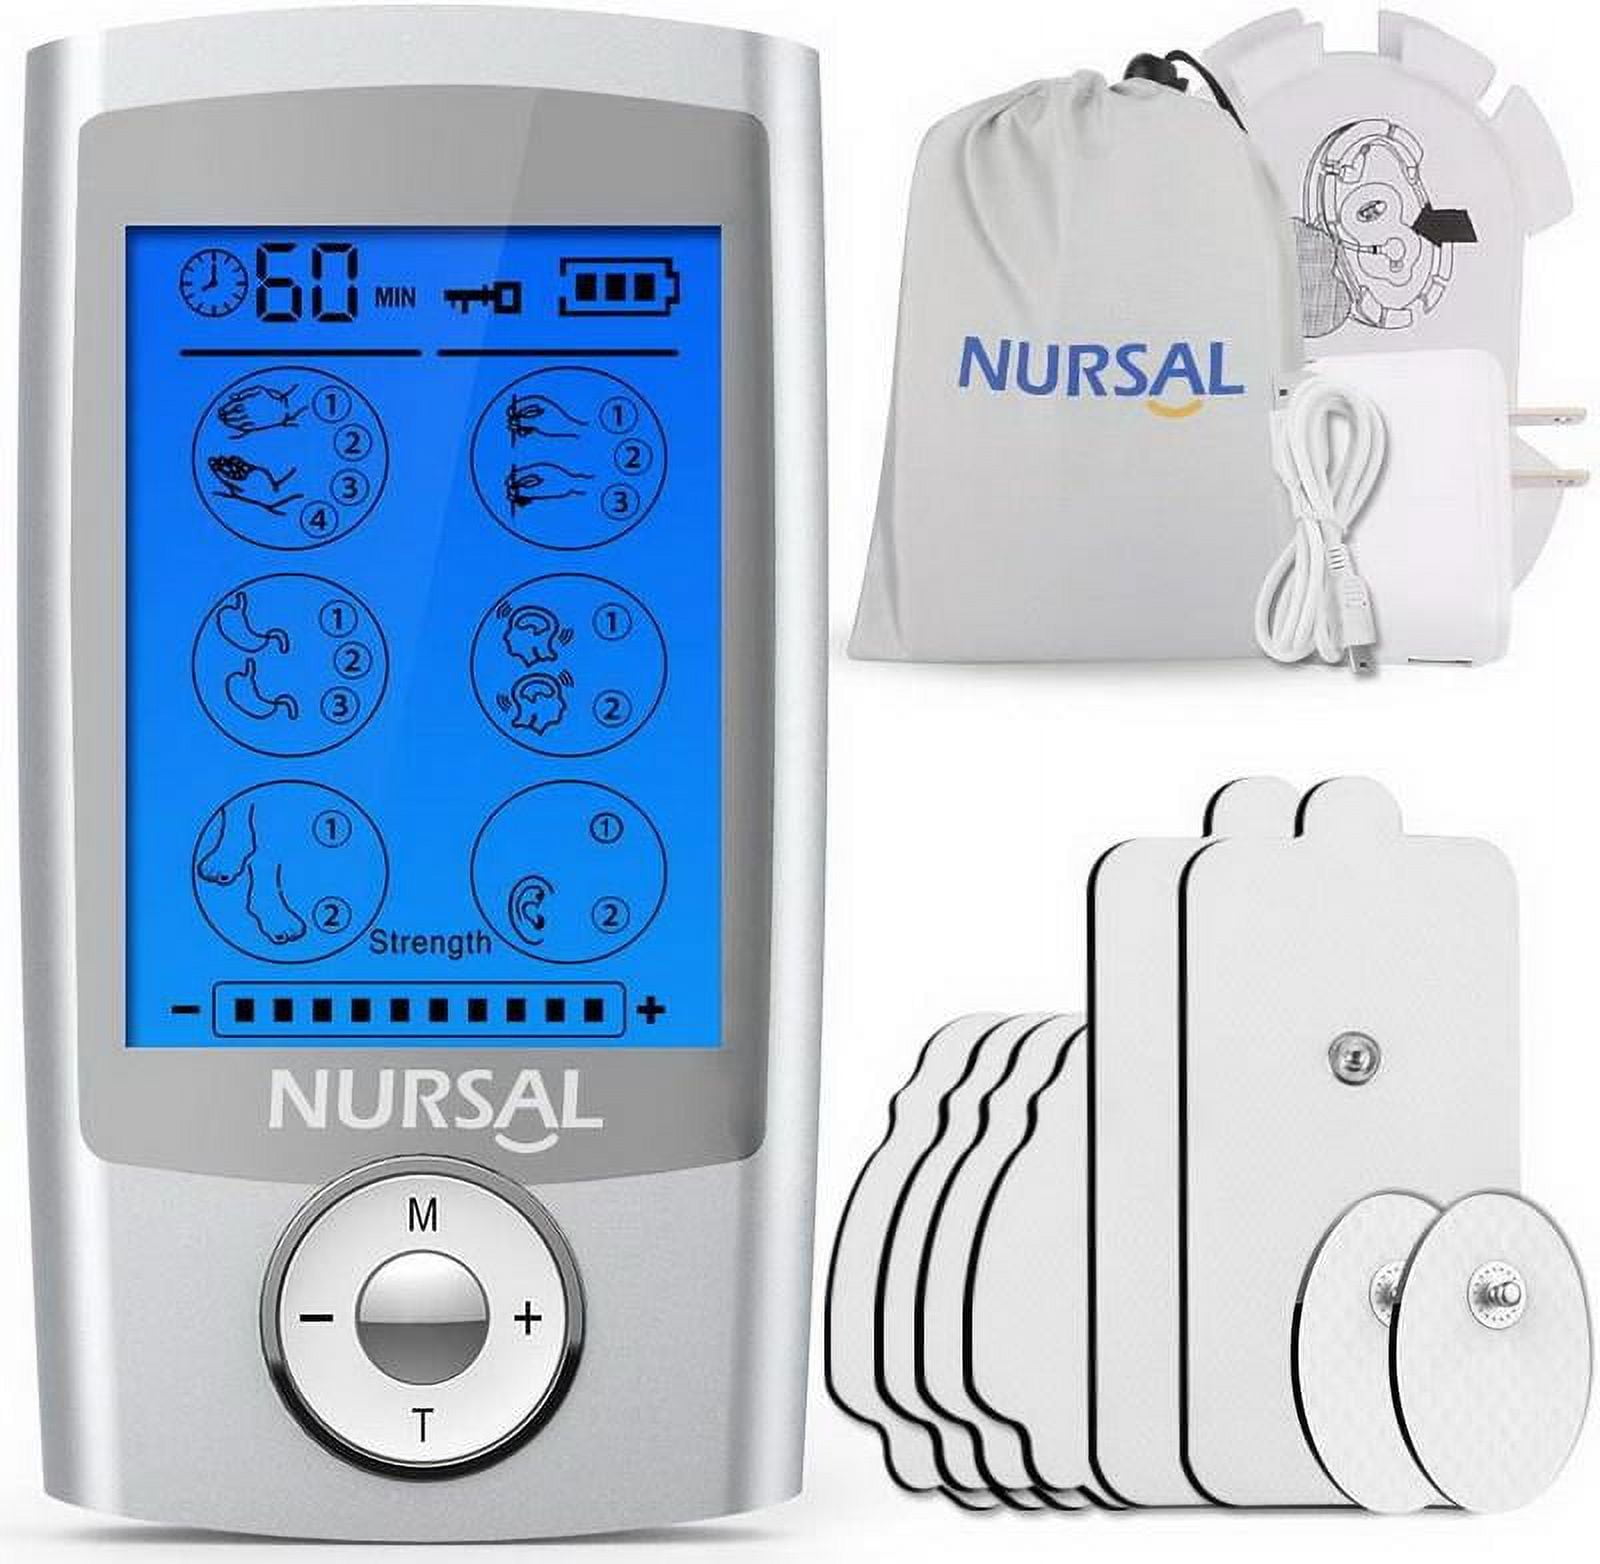 NURSAL TENS EMS Unit Muscle Stimulator for Pain Relief Therapy, Electric 24  Modes Dual Channel TENS - Miscellaneous Items - Cincinnati, Facebook  Marketplace